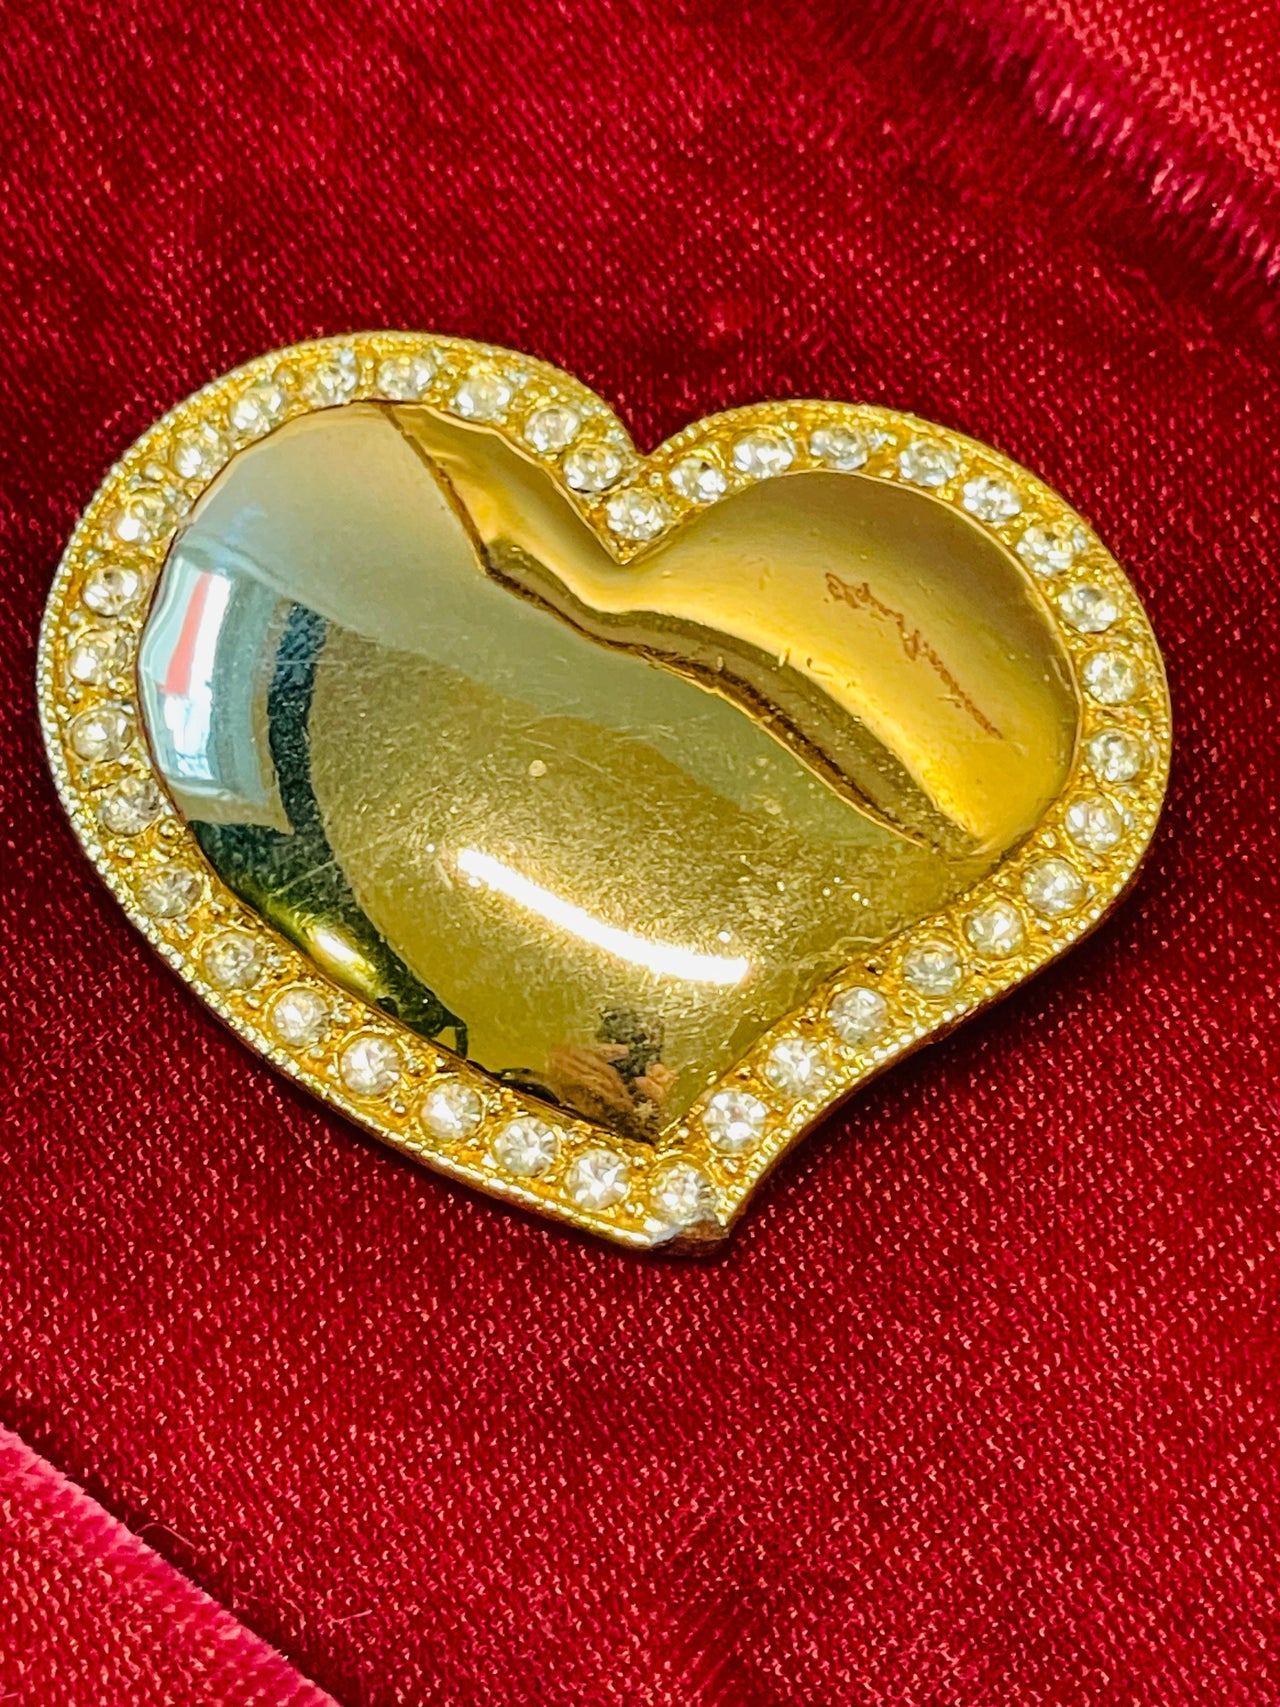 Gold Heart Brooch Lined with Rhinestones Devil's Details 